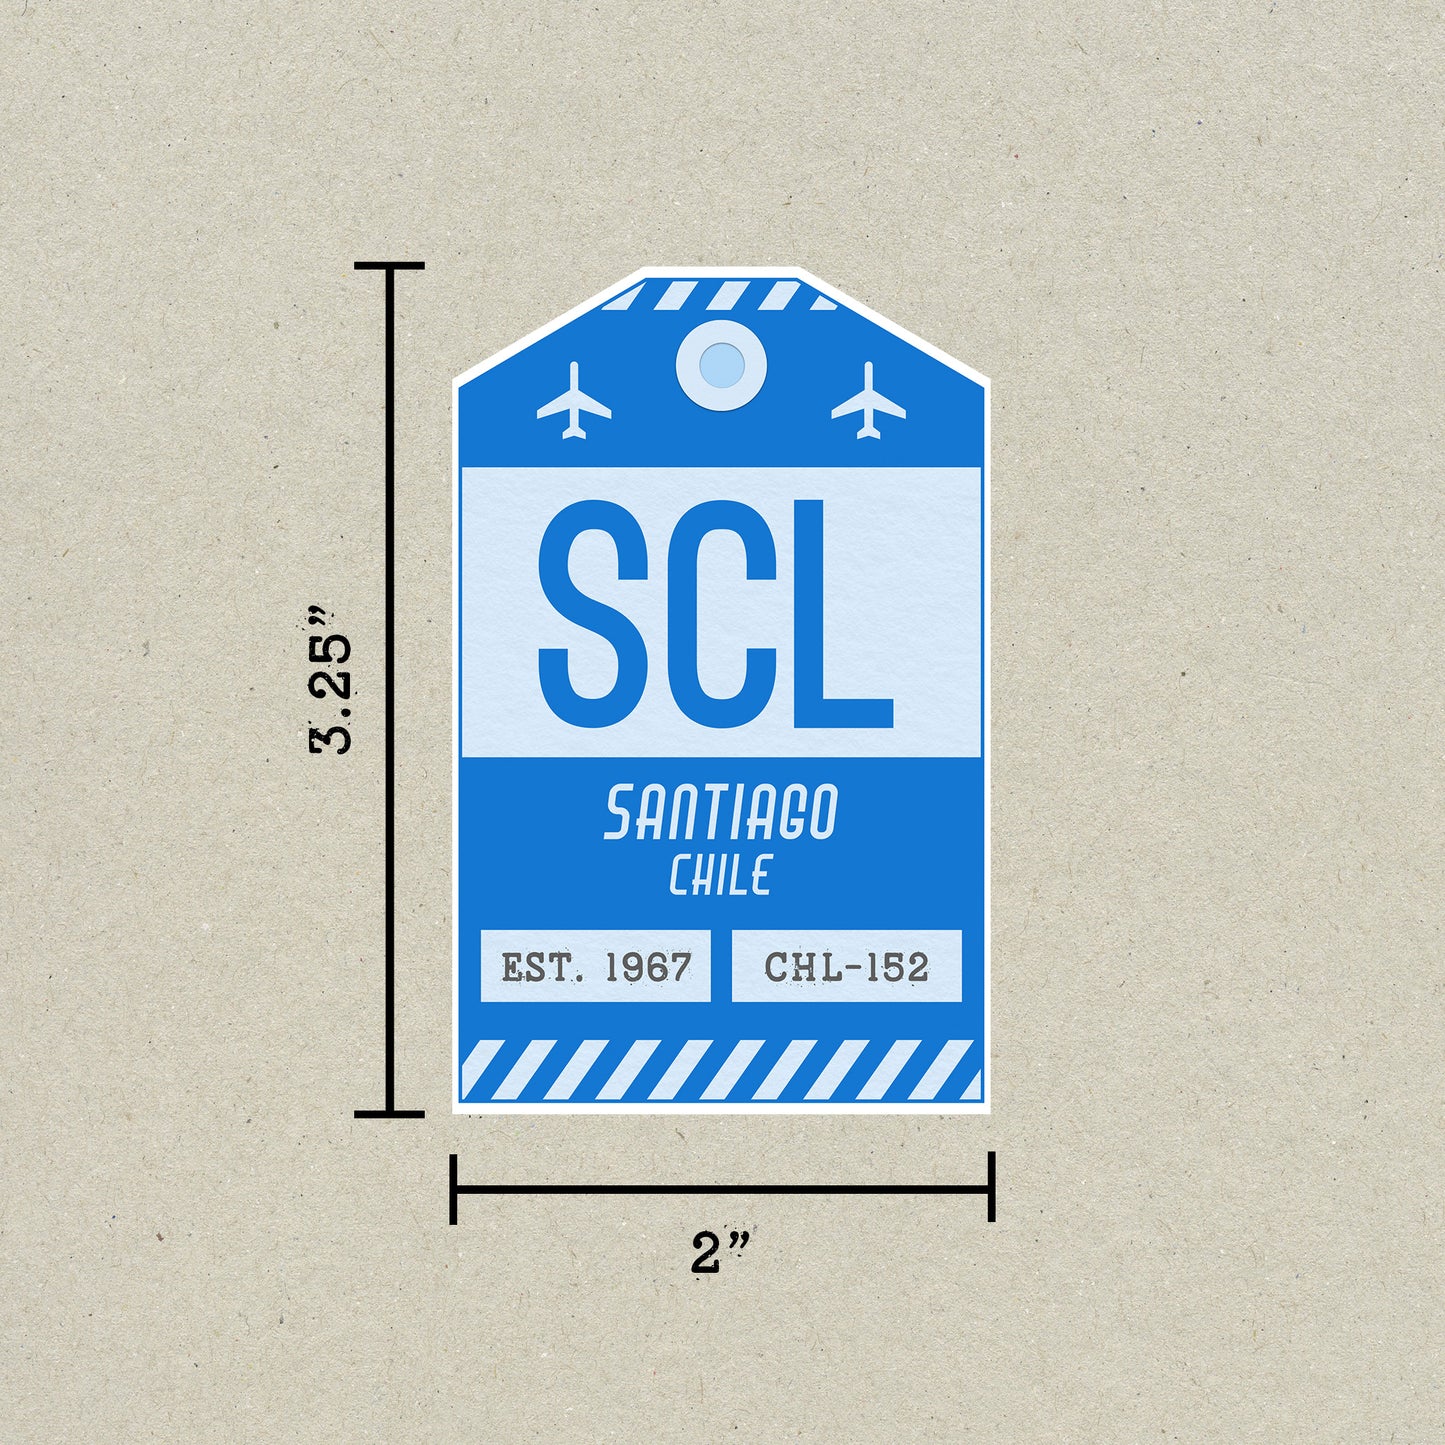 SCL Vintage Luggage Tag Sticker